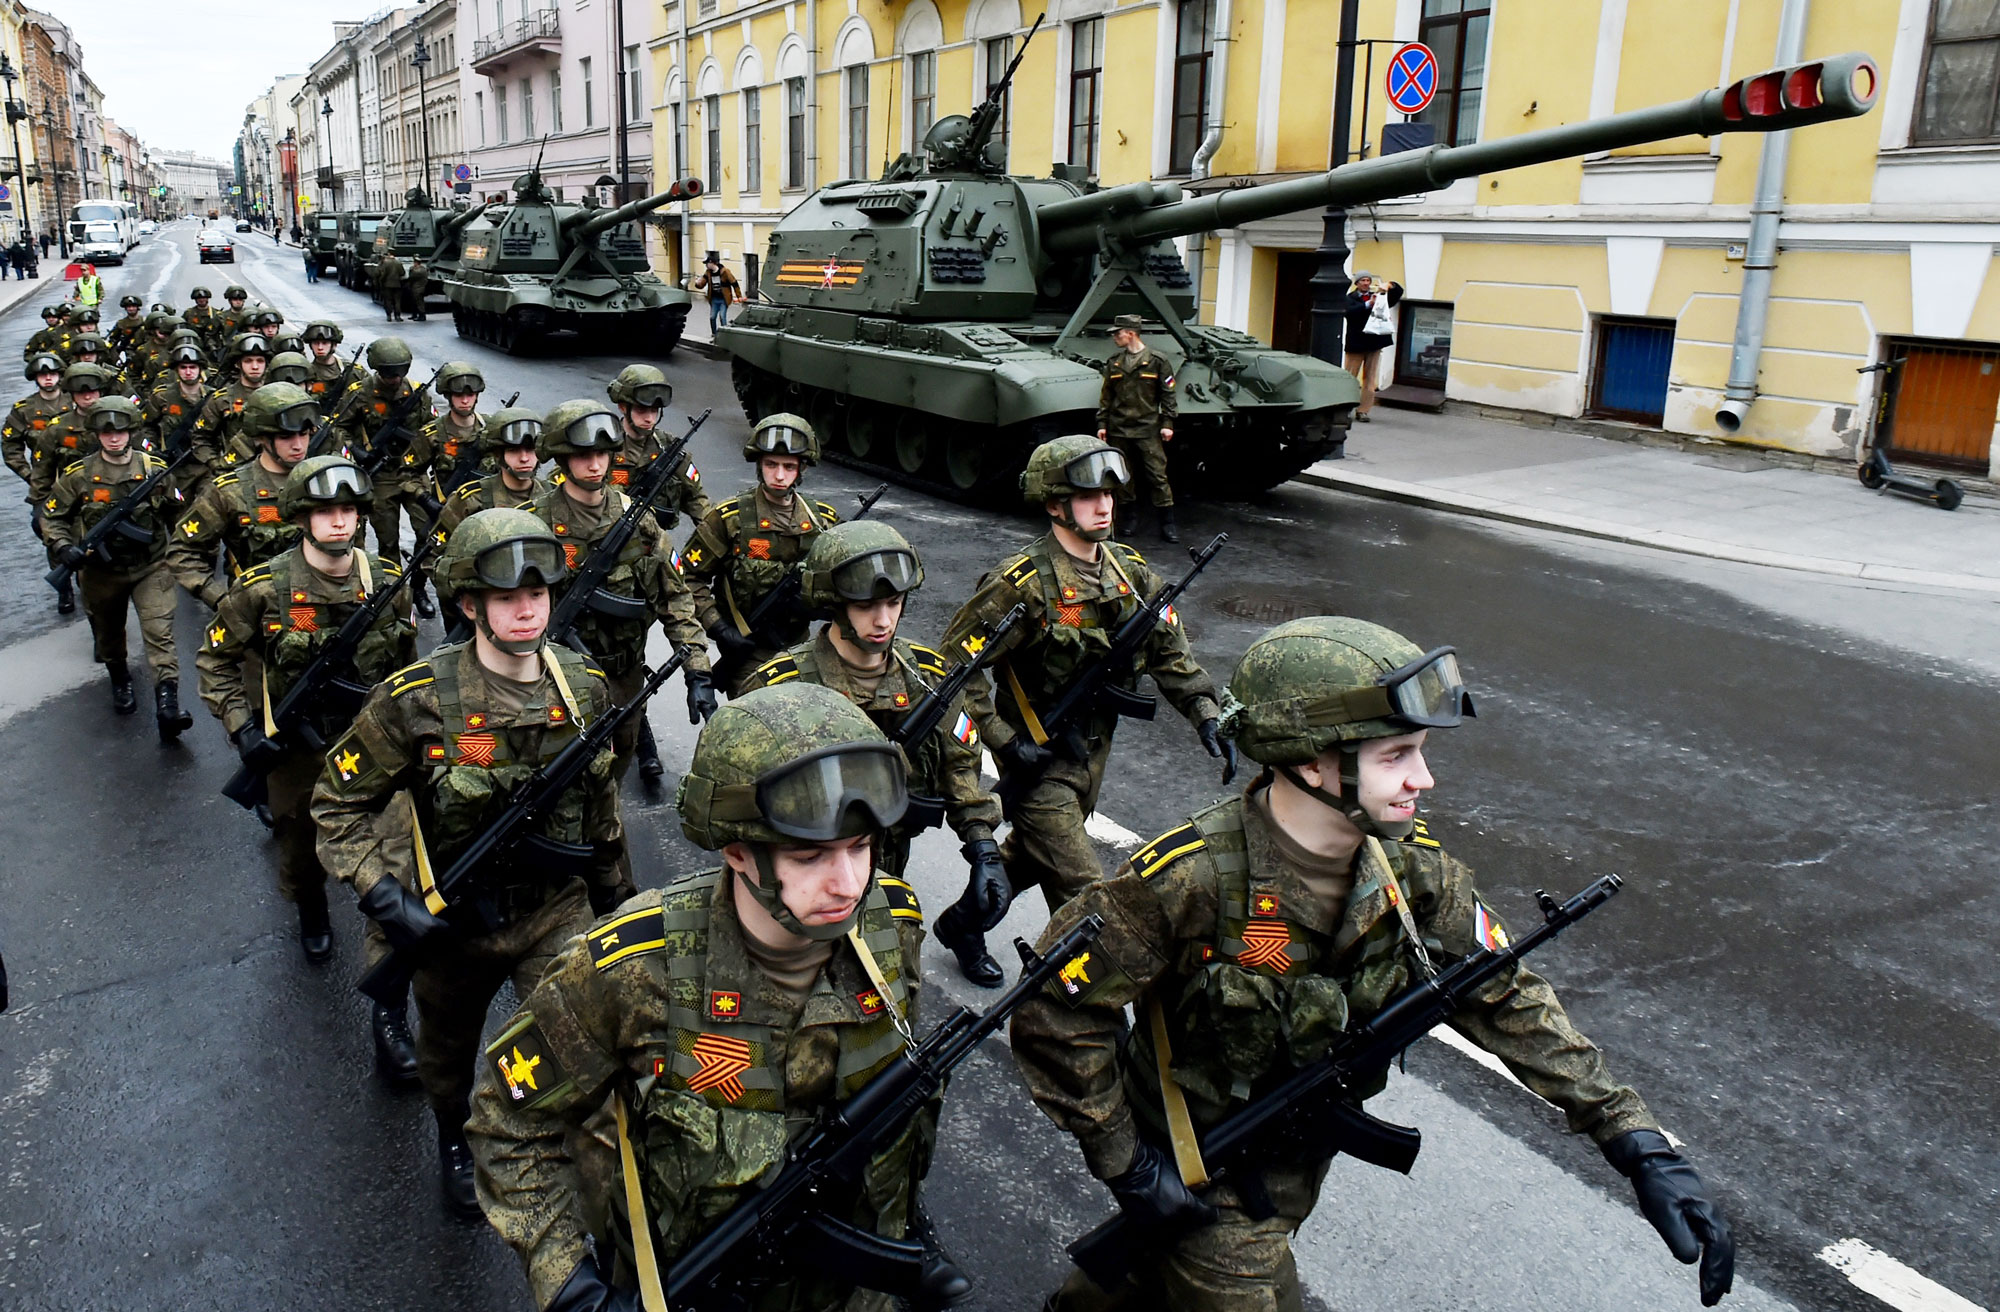 Russian soldiers refuse to carry out “suicidal orders”